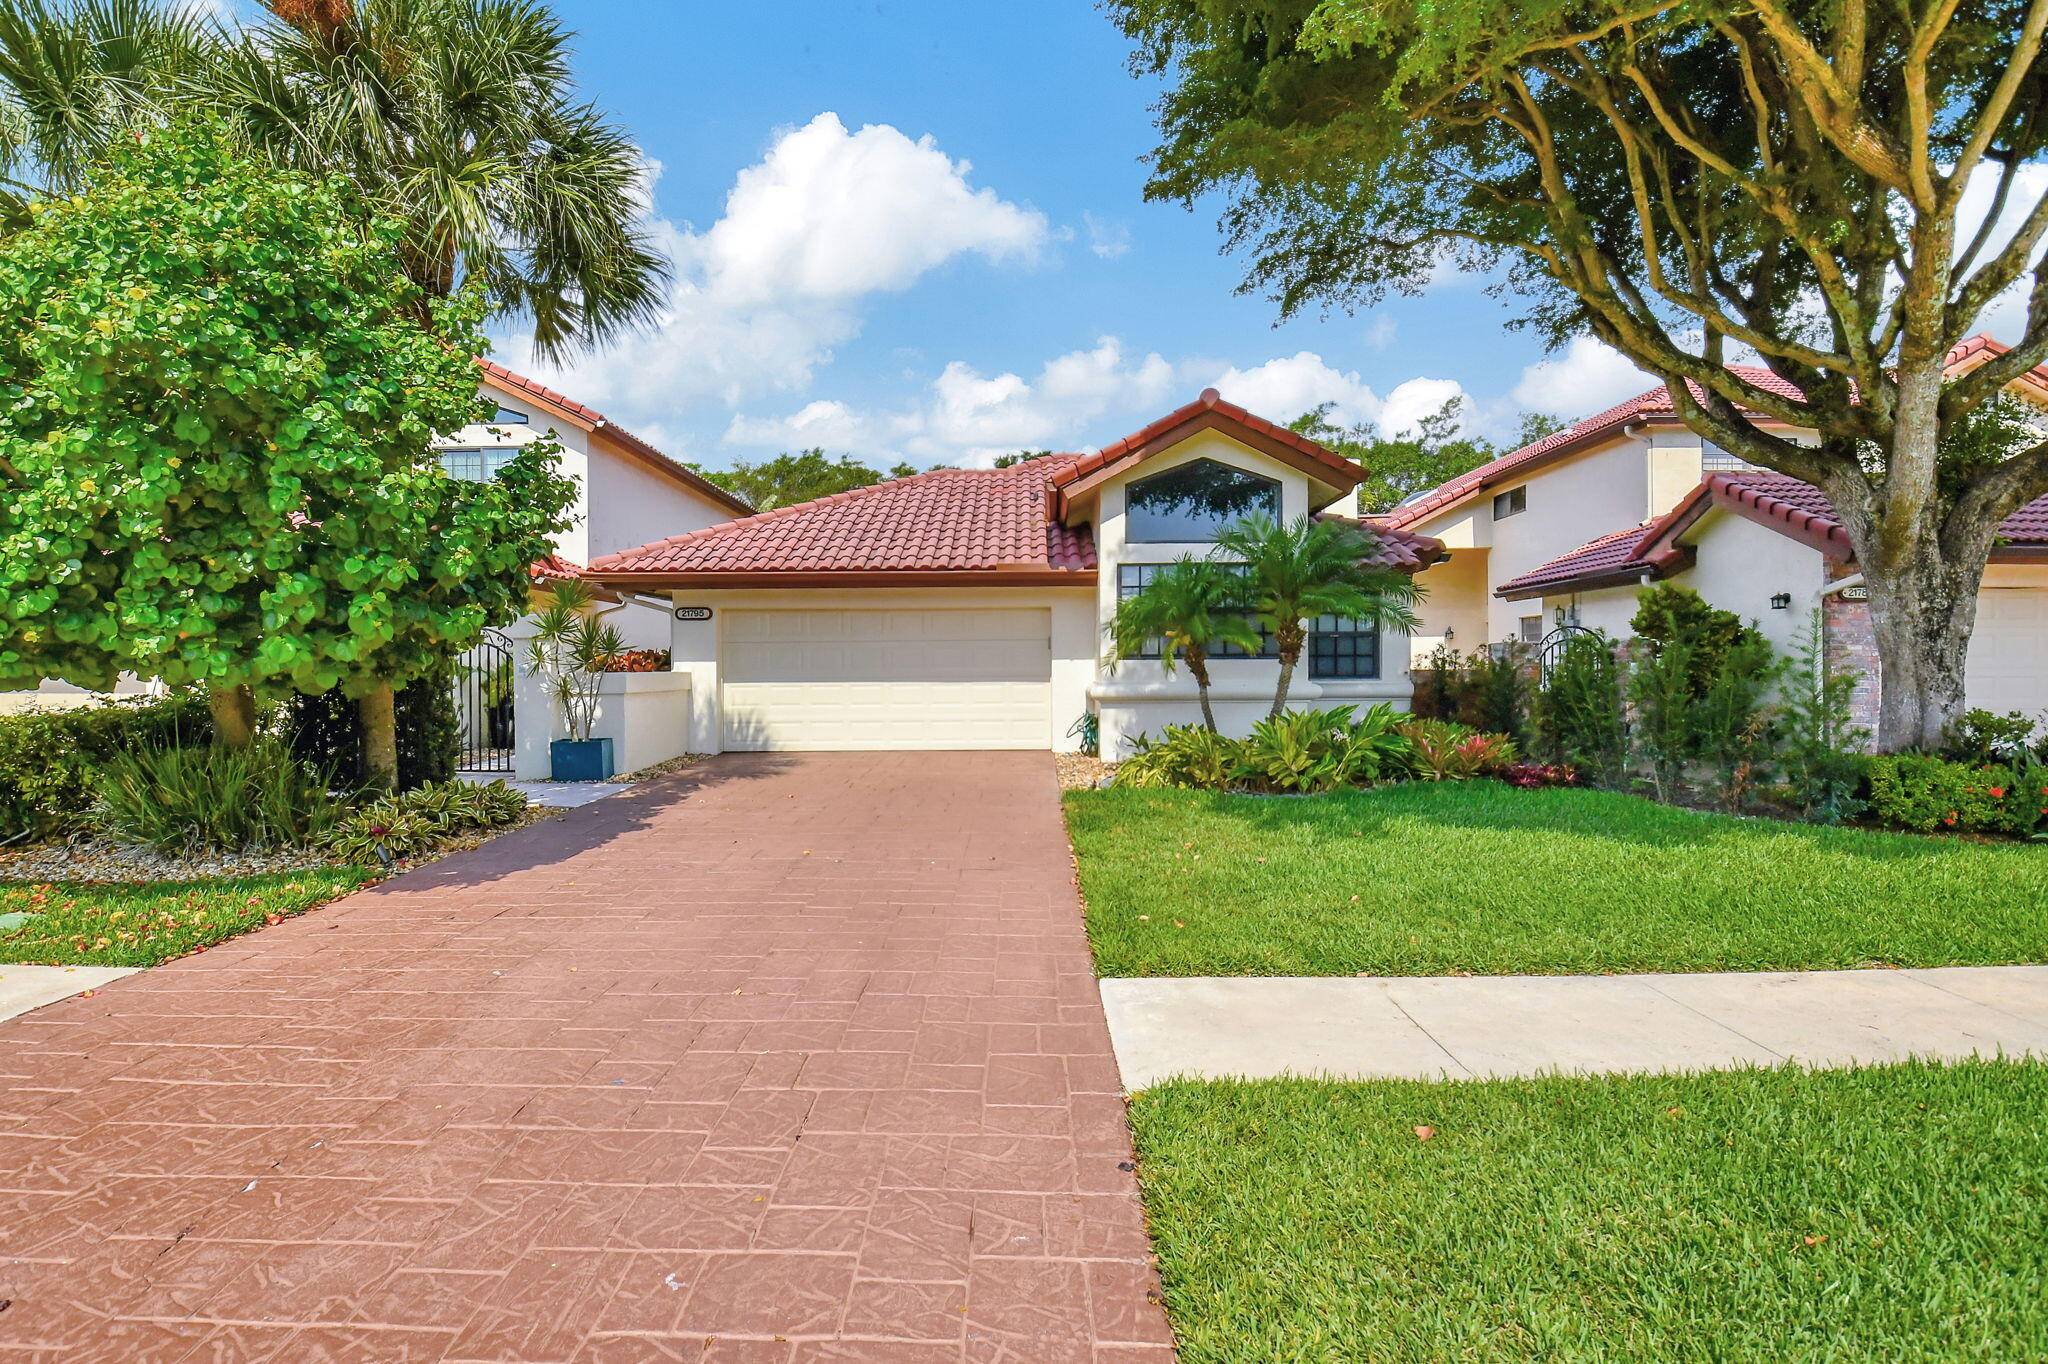 Located in Town Place Club Villas in the heart of Boca Raton, this gorgeous 3 bedroom 2 bath one story home is an opportunity you won't want to miss !